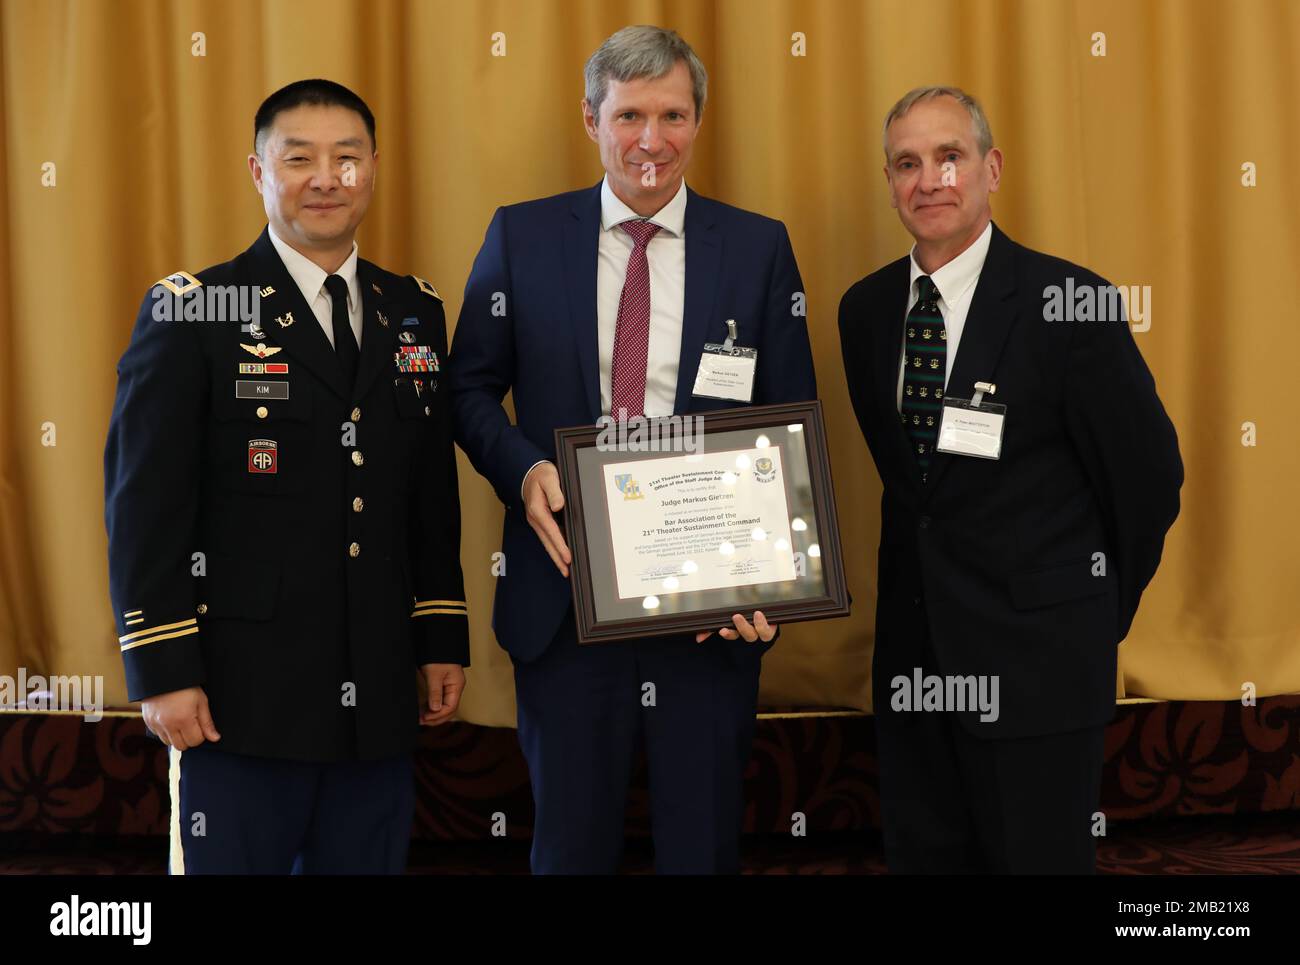 Col. Tony Kim, Staff Judge Advocate for the 21st Theater Sustainment Command (Left), Judge Markus Gietzen, member of the Bar Association of the 21st TSC (Middle), and  Peter Masterton, Chief of International Law Division and Senior Civilian Advisor, 21st TSC (Right), pose for photo displaying plaque given to Gietzen, June 10, 2022, at the Armstrong Club, Vogelweh, Germany. The Law Day event offers excellent opportunities for personal and professional exchanges between local U.S. Armed Forces members and the Rhineland-Palatinate judiciary members. Stock Photo